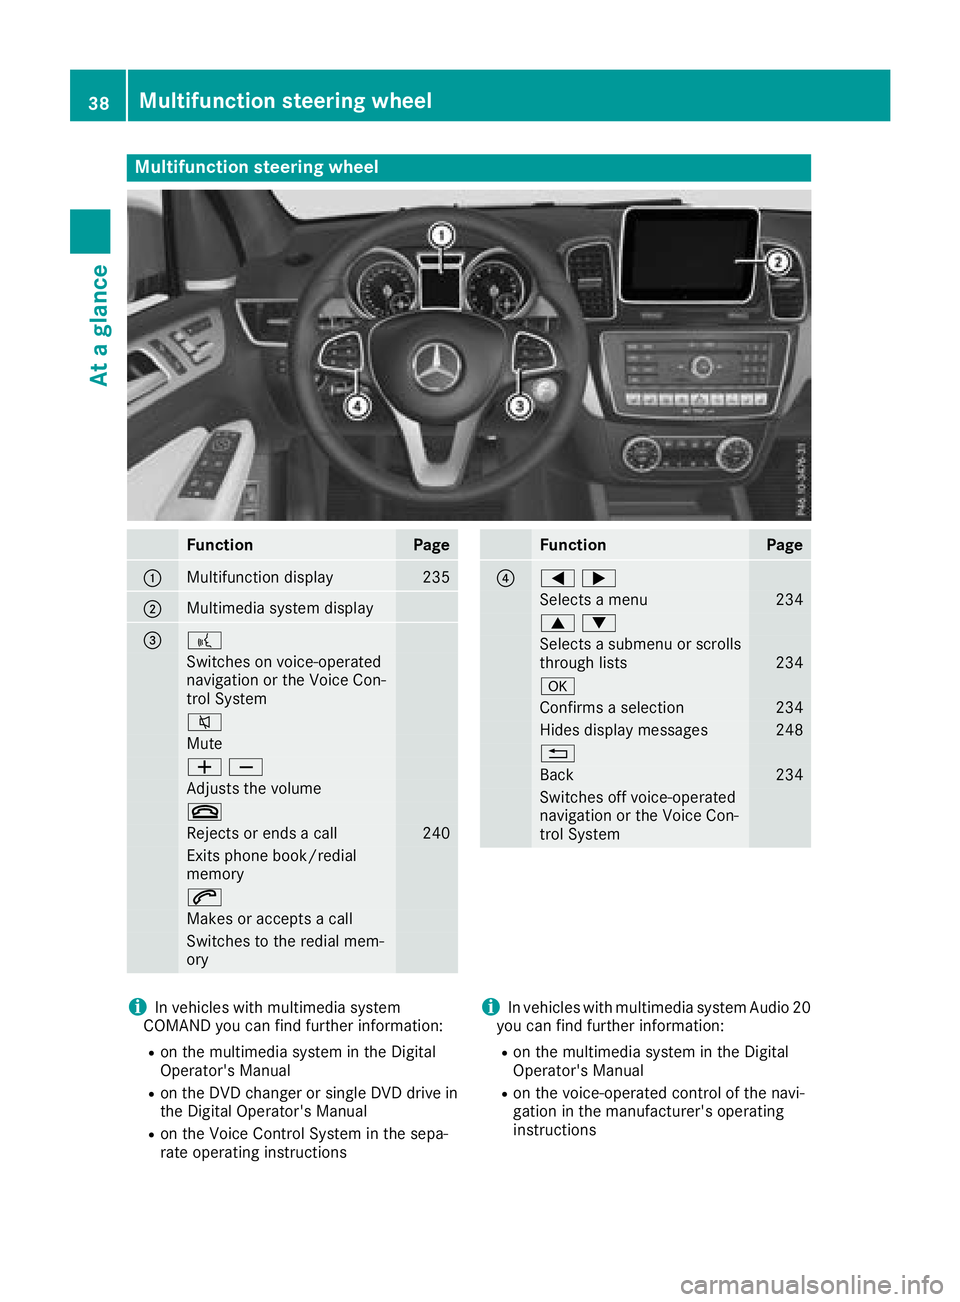 MERCEDES-BENZ GLS SUV 2018  Owners Manual Multifunction steering wheel
FunctionPage
:Multifunction display235
;Multimedia system display
=?
Switches on voice-operated
navigation or the Voice Con-
trol System
8
Mute
WX
Adjusts the volume
~
Rej